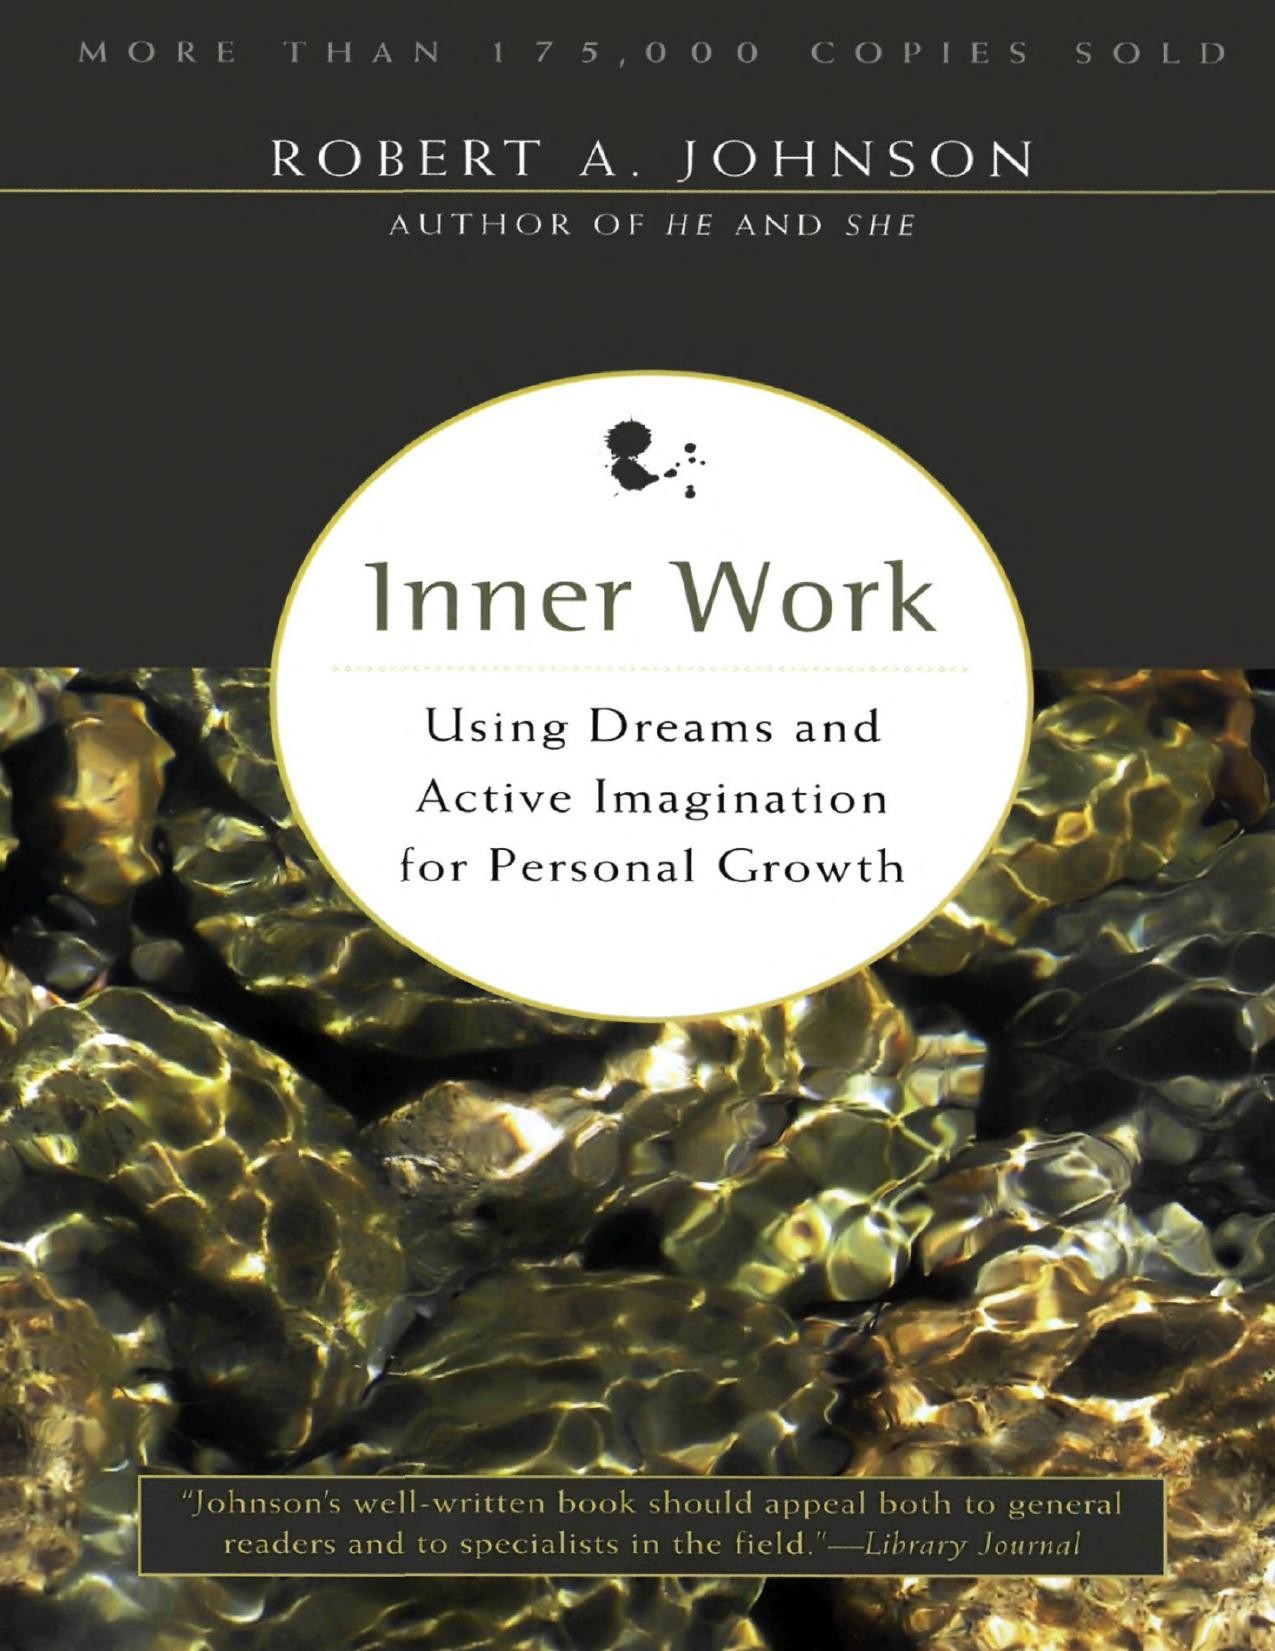 Inner Work: Using Dreams and Active Imagination for Personal Growth - Summary